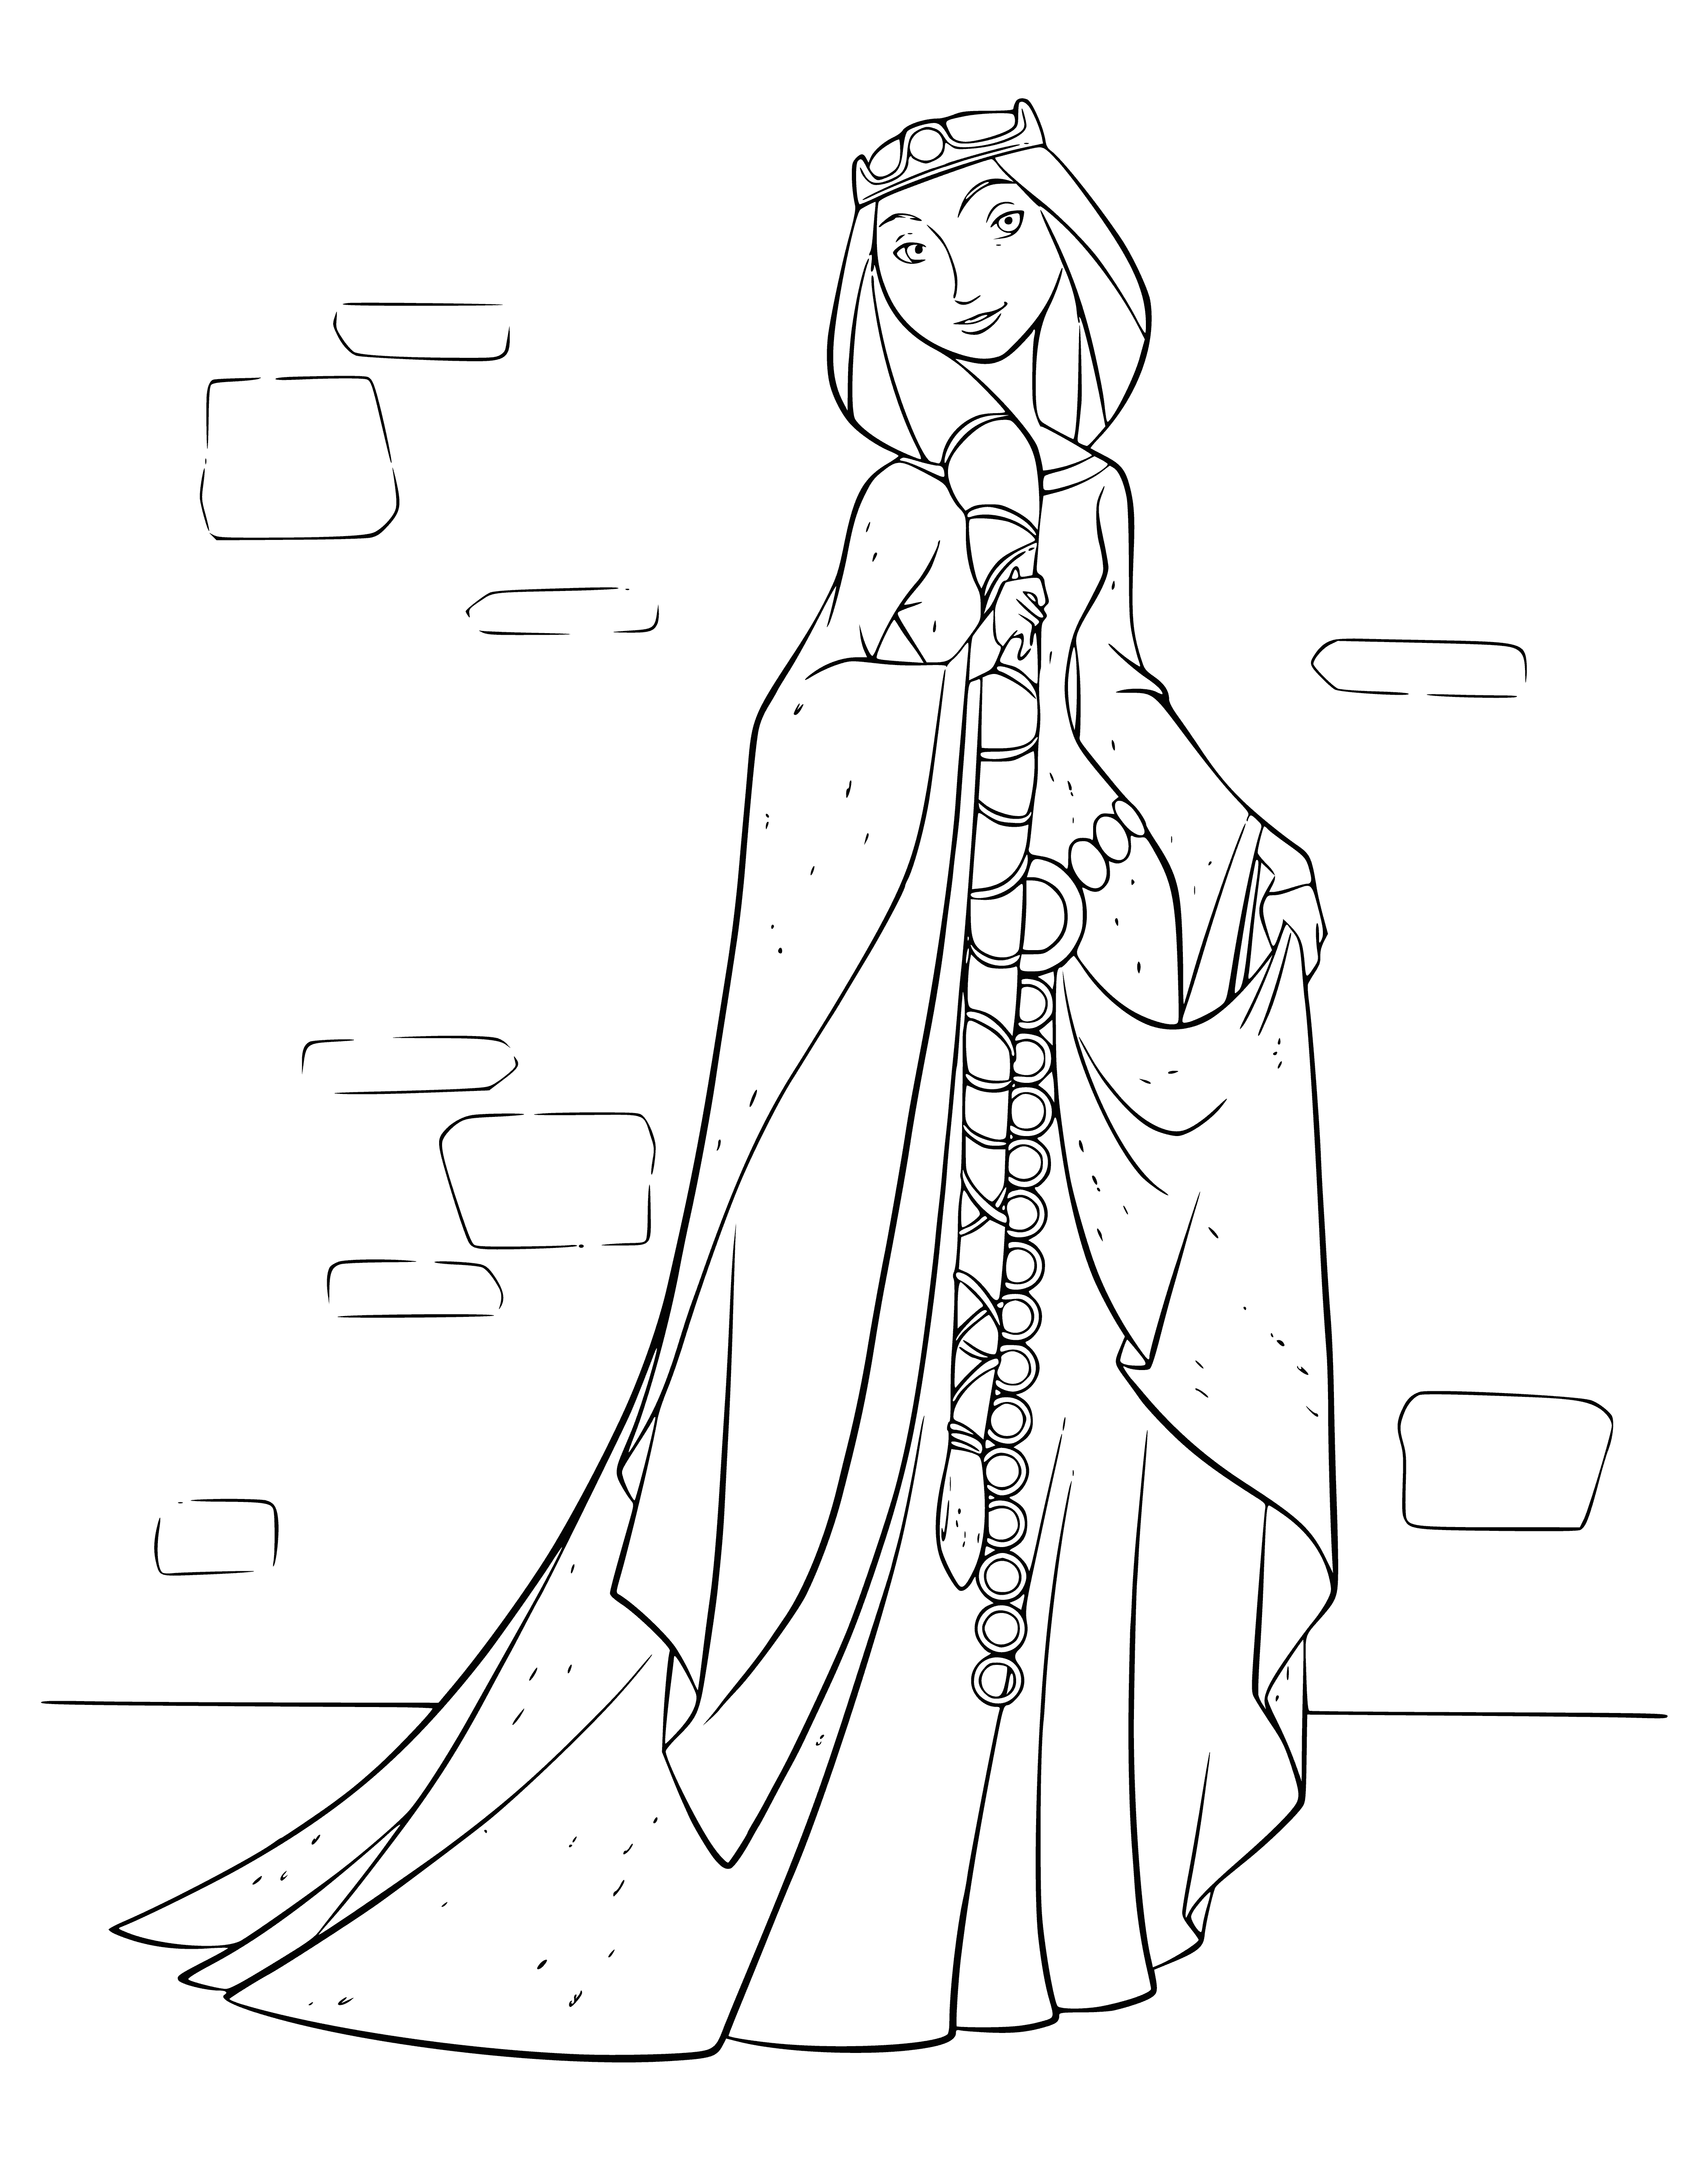 coloring page: Regal queen in ornate dress on coloring page with castle in the background & cloudy sky.